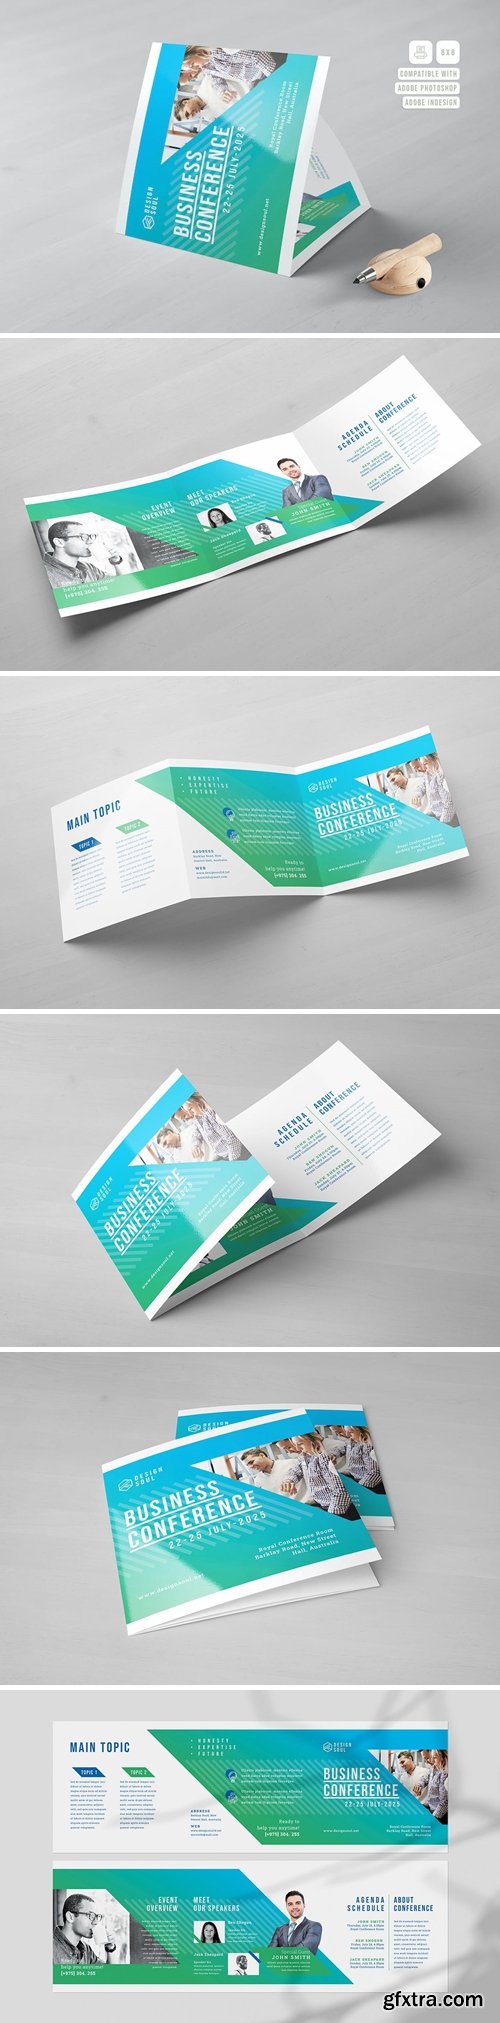 Conference Square Trifold Brochure 4HWJ9SN